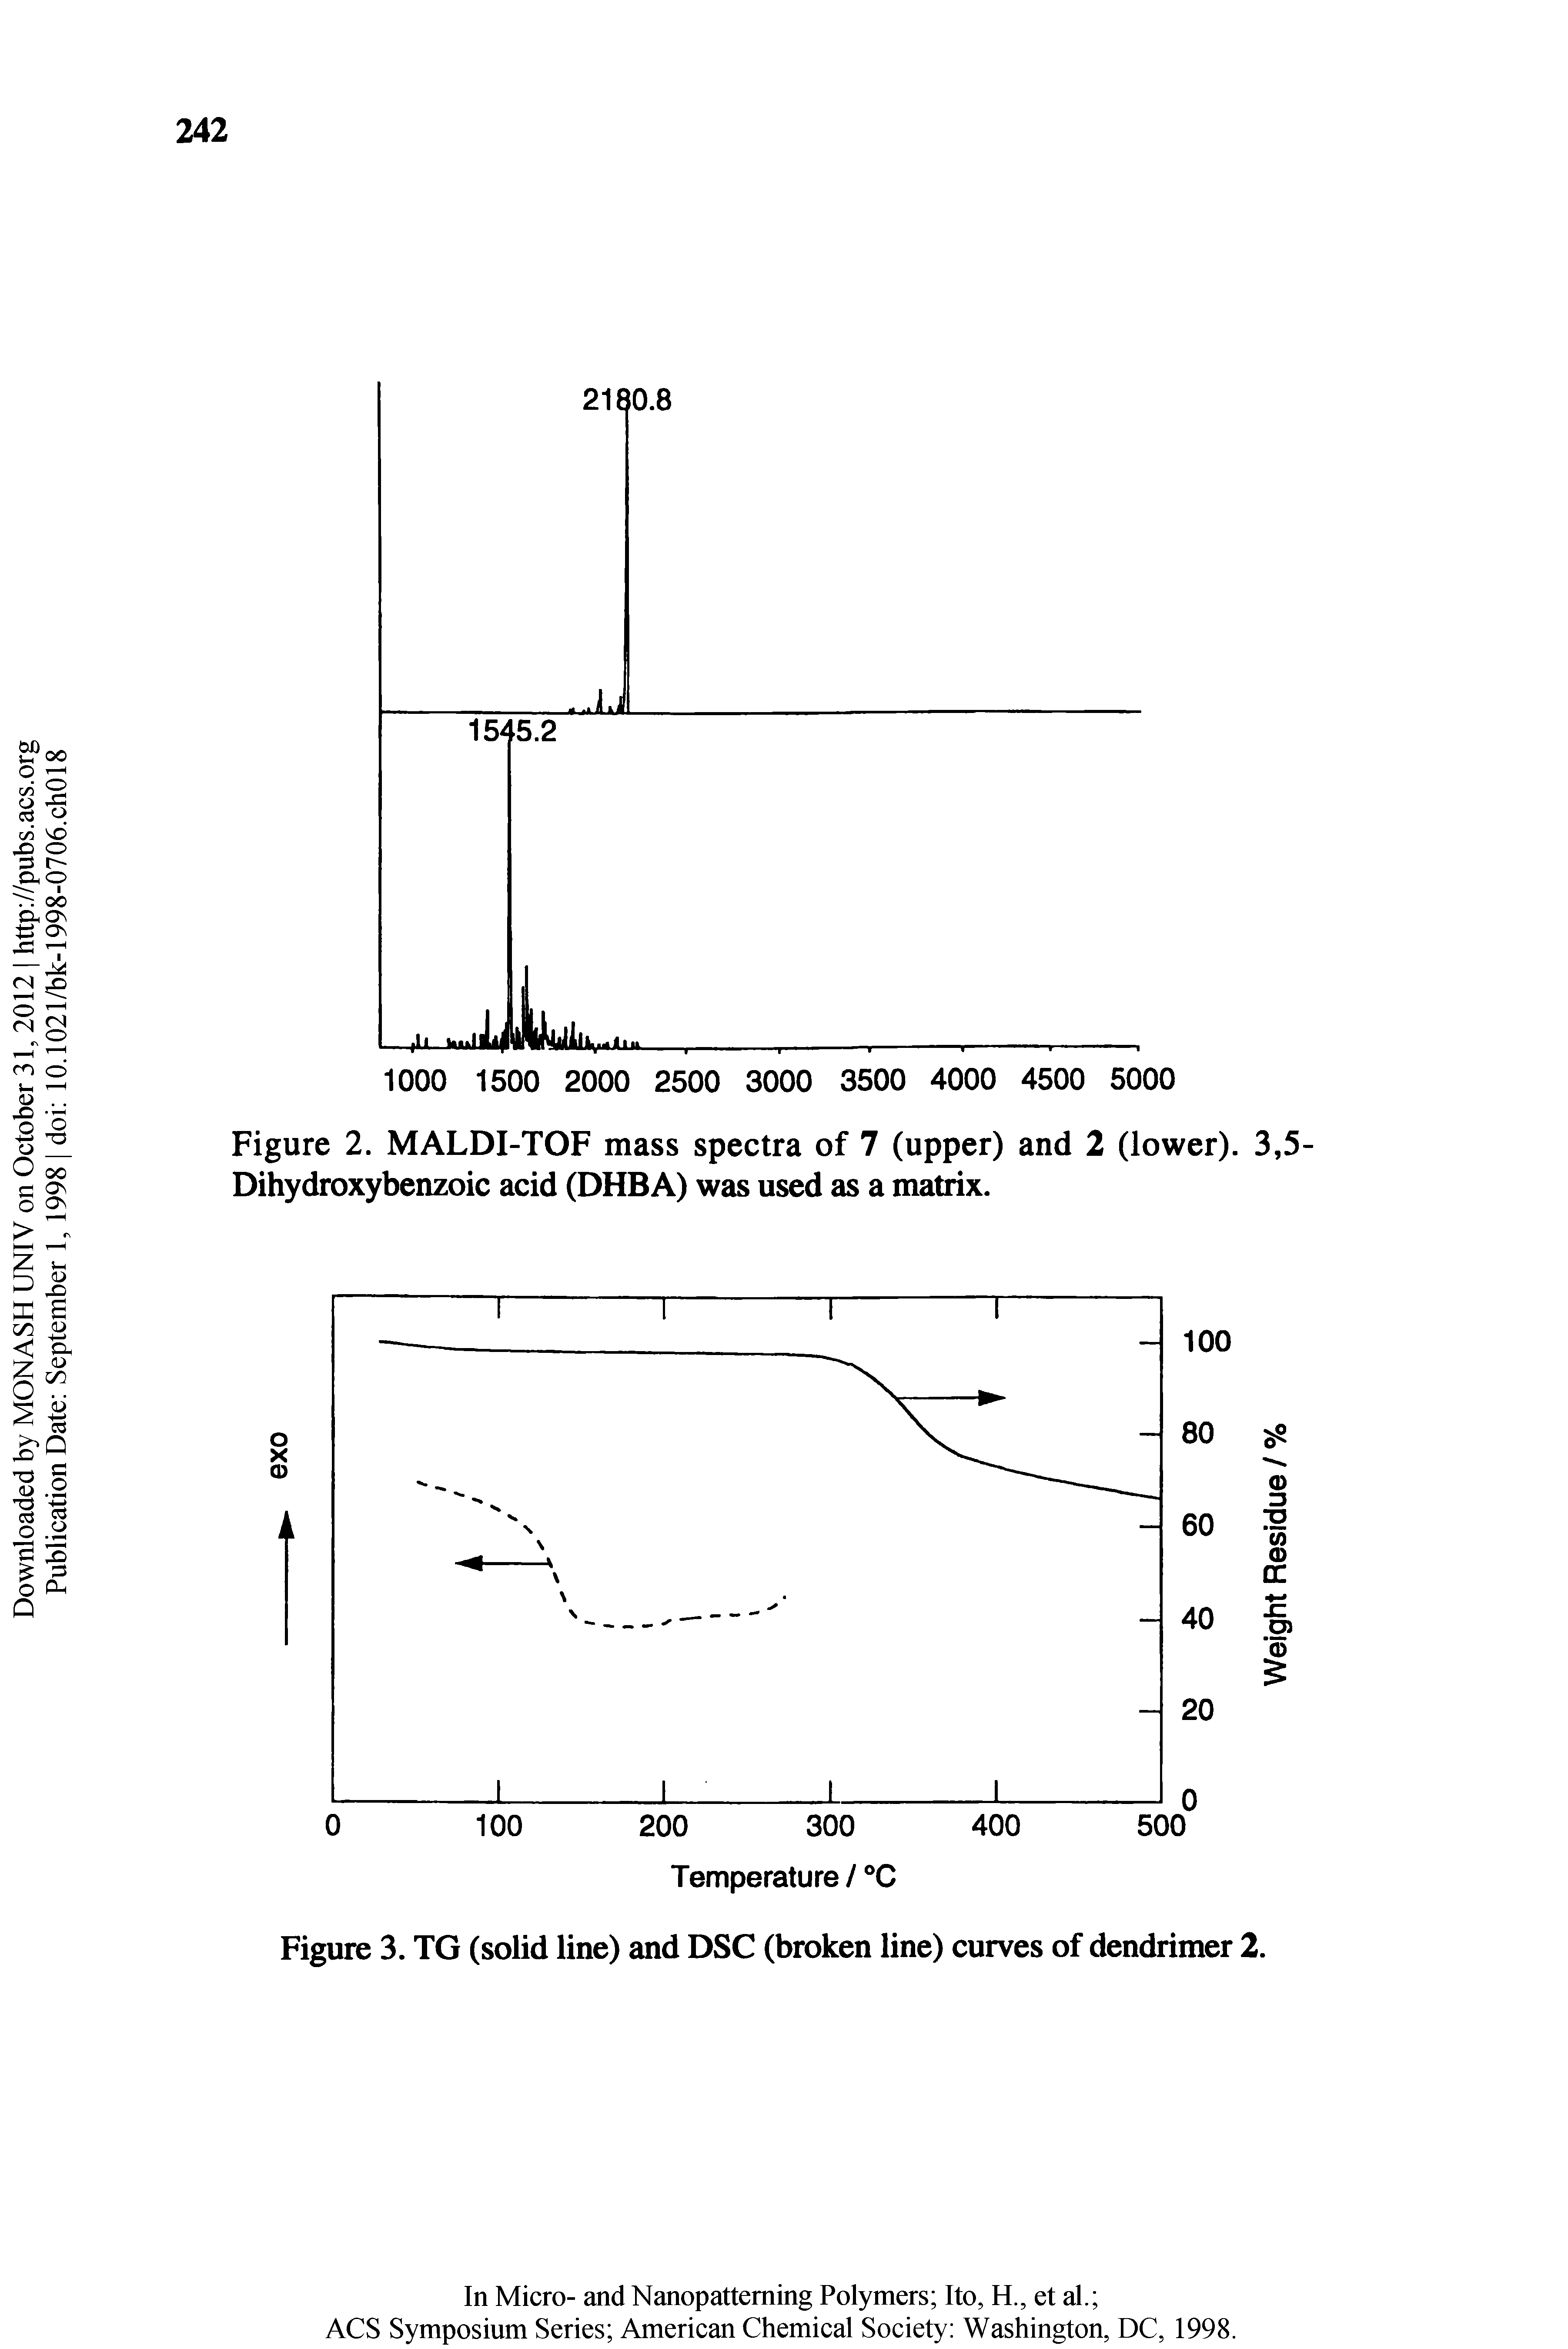 Figure 2. MALDI-TOF mass spectra of 7 (upper) and 2 (lower). 3,5-Dihydroxybenzoic acid (DHBA) was used as a matrix.